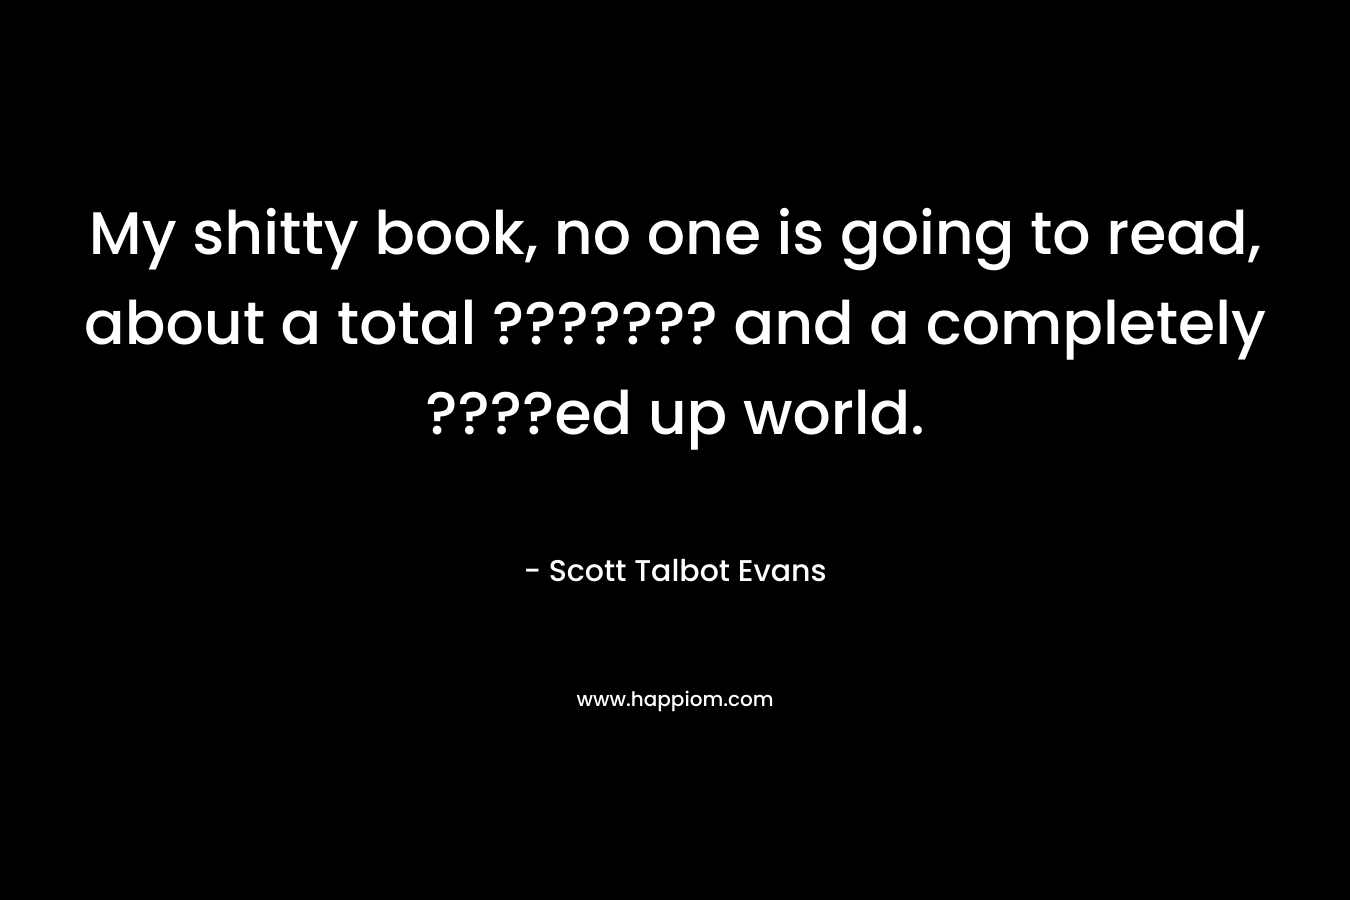 My shitty book, no one is going to read, about a total ??????? and a completely ????ed up world.